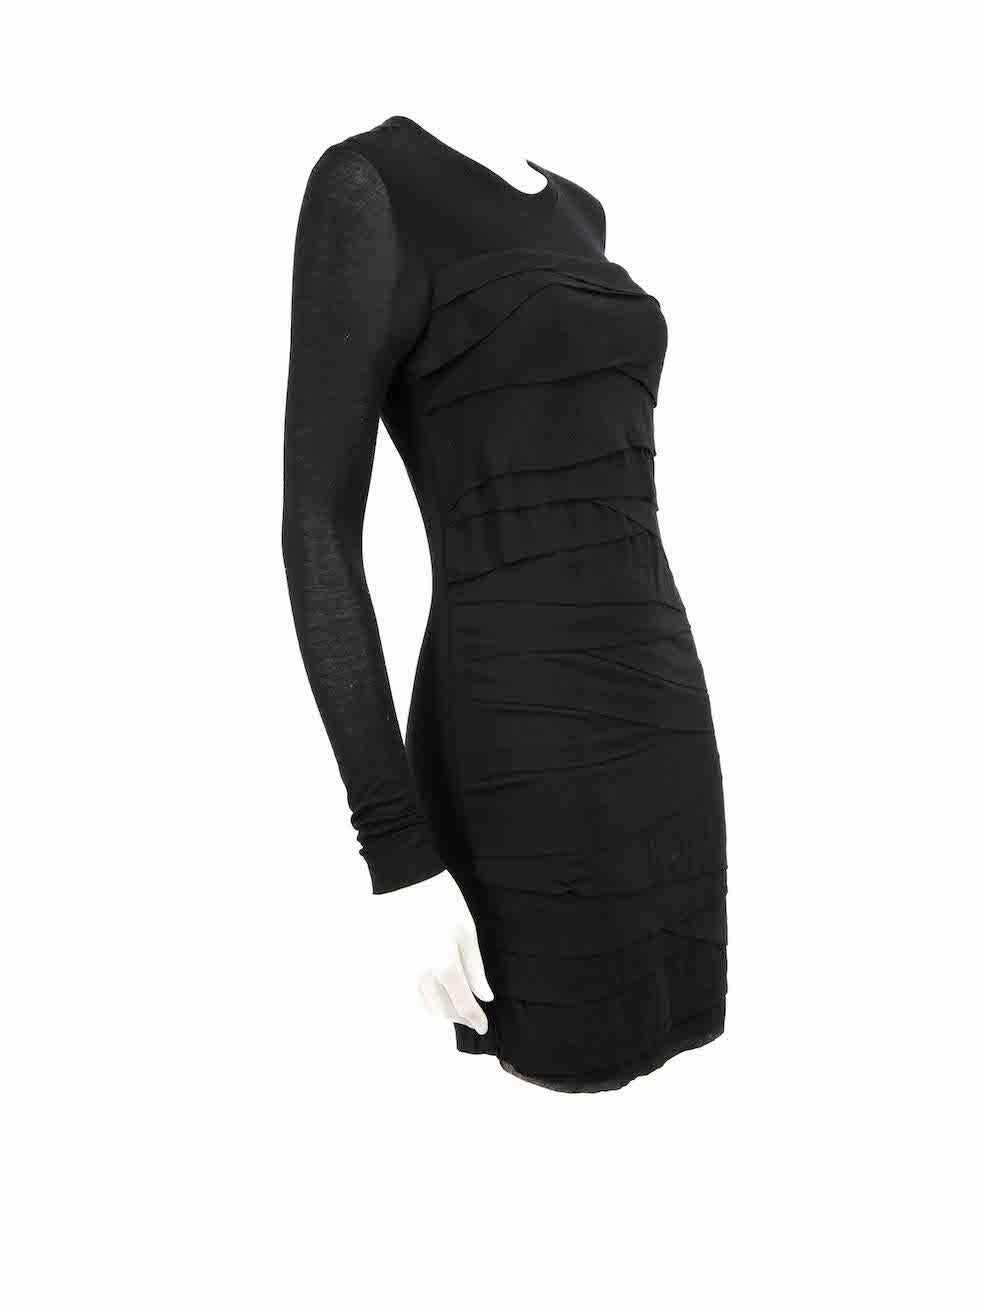 CONDITION is Very good. Minimal wear to dress is evident. Minimal wear to both sleeves with pilling to the underarms and a small hole to the left arm can be seen on this used Diane Von Furstenberg designer resale item.
 
 
 
 Details
 
 
 Black
 
